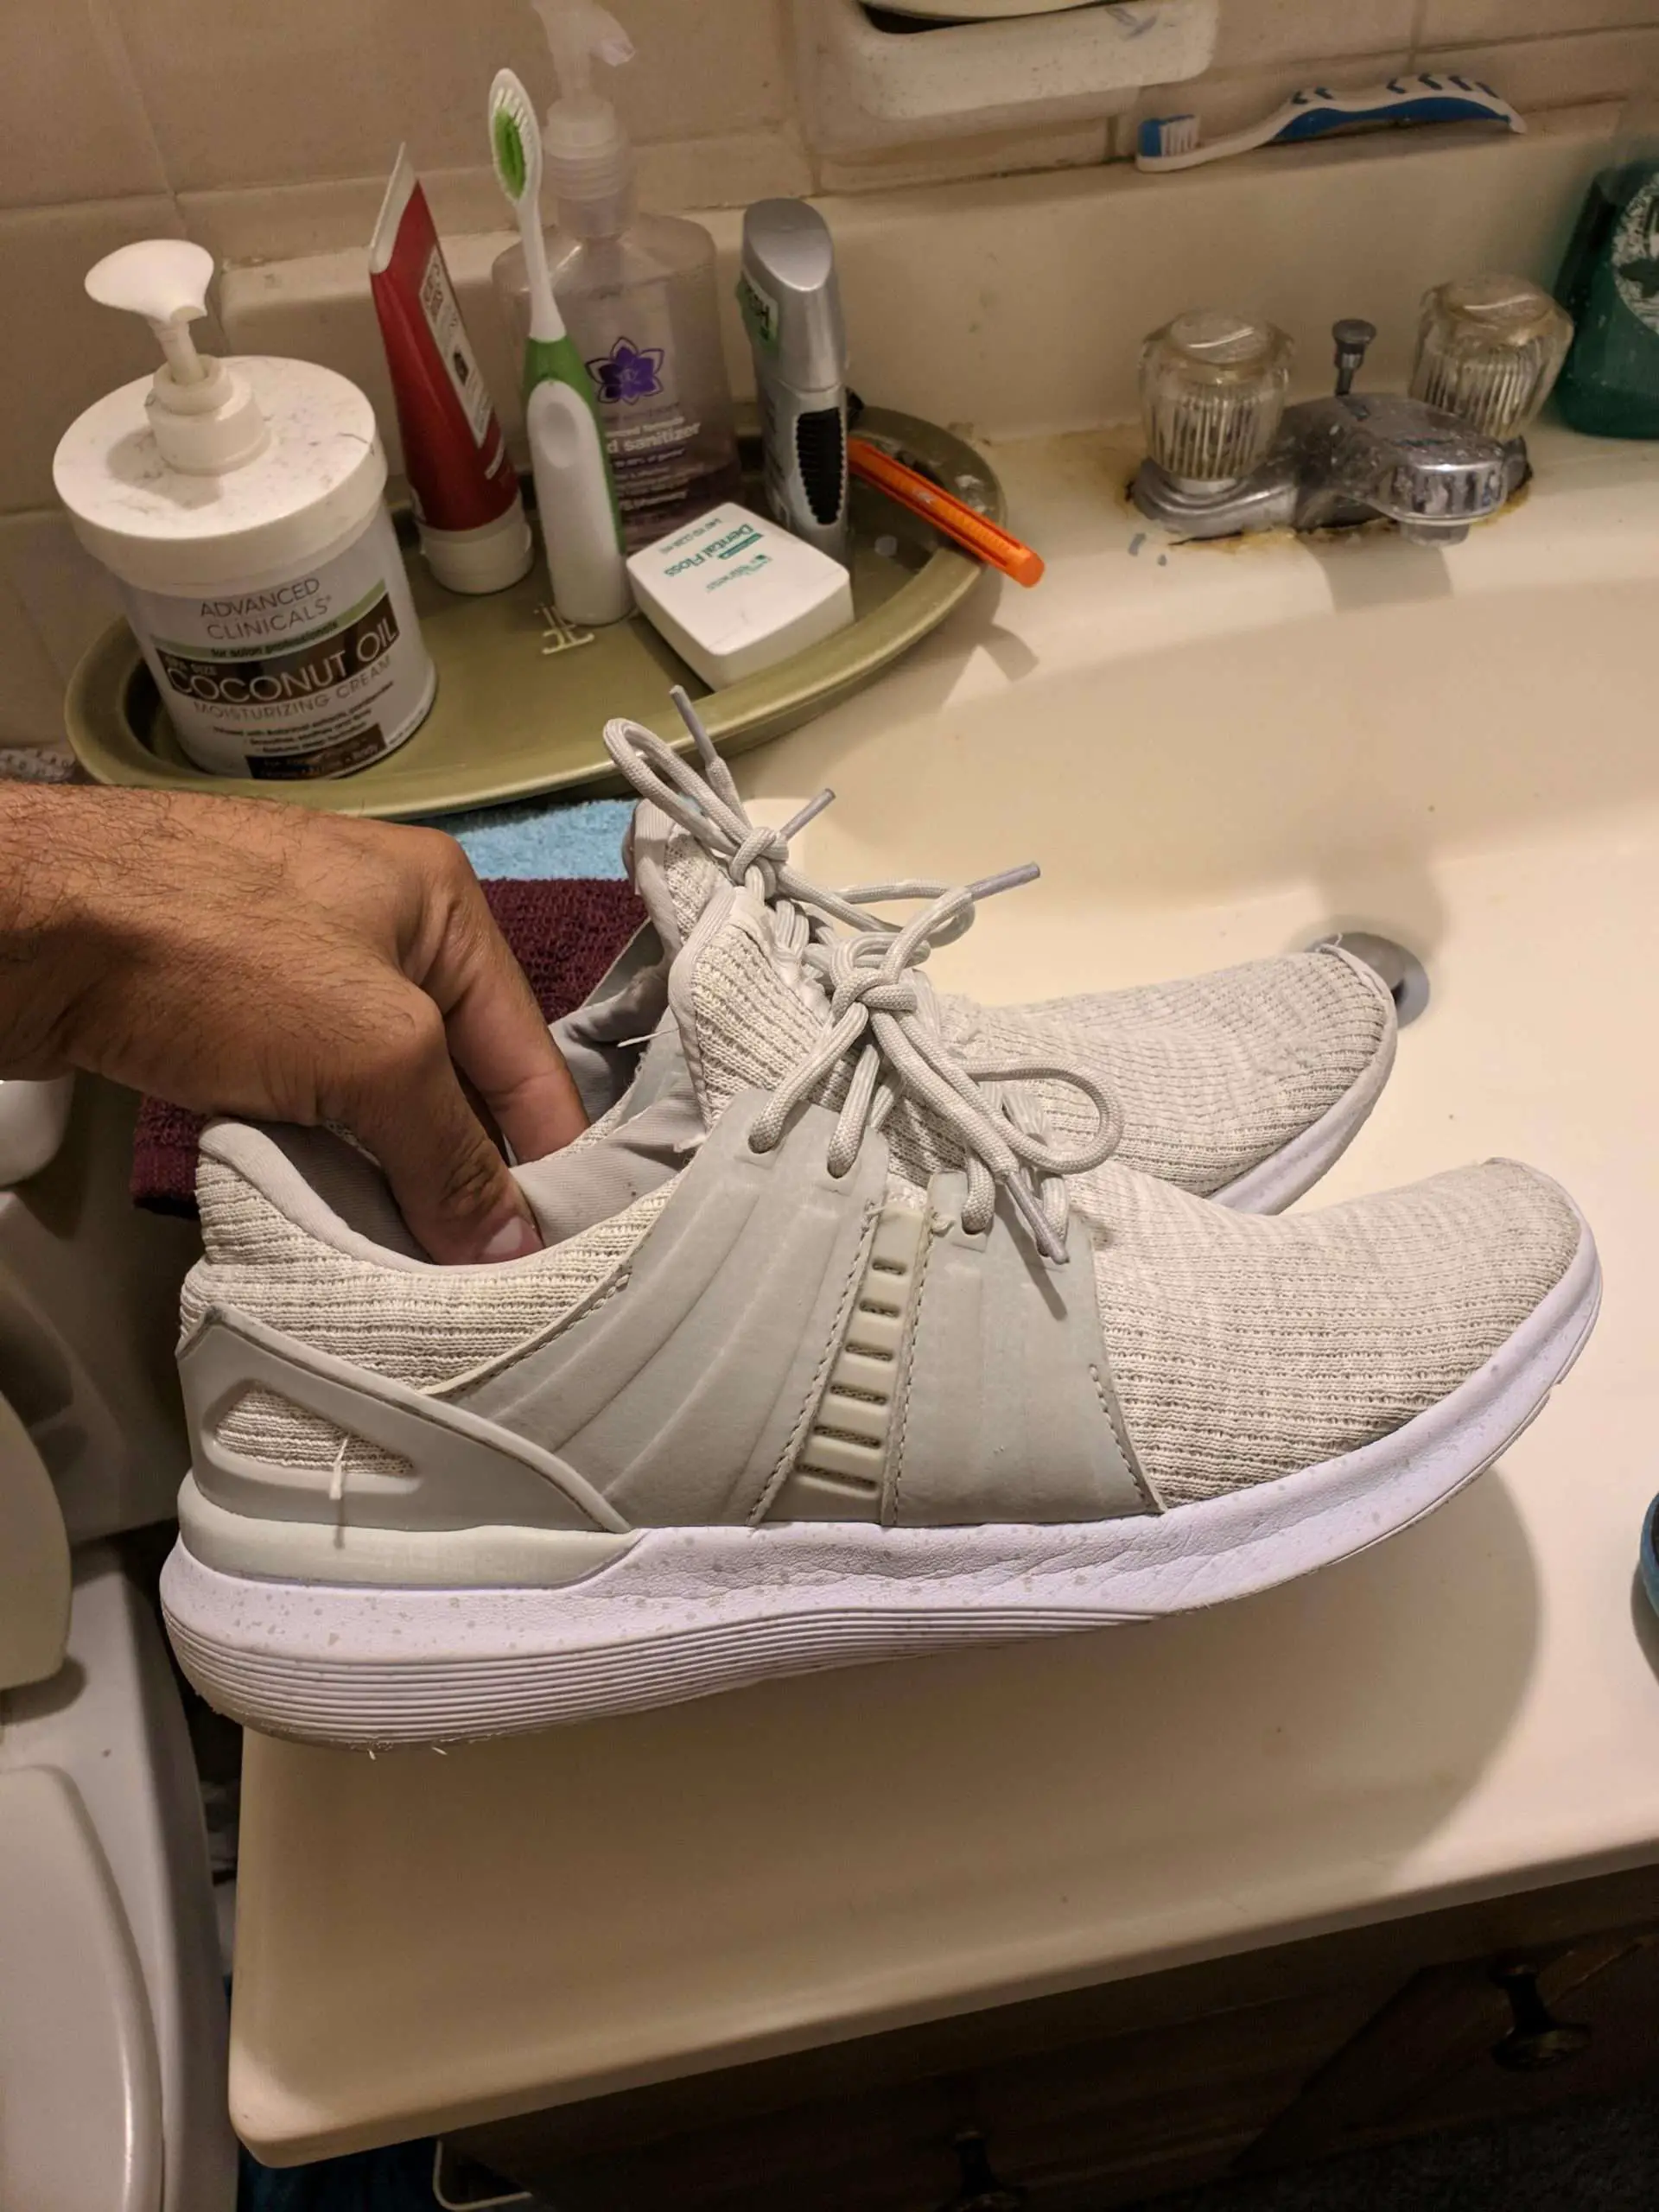 Anyway I can make these shoes completely white? I